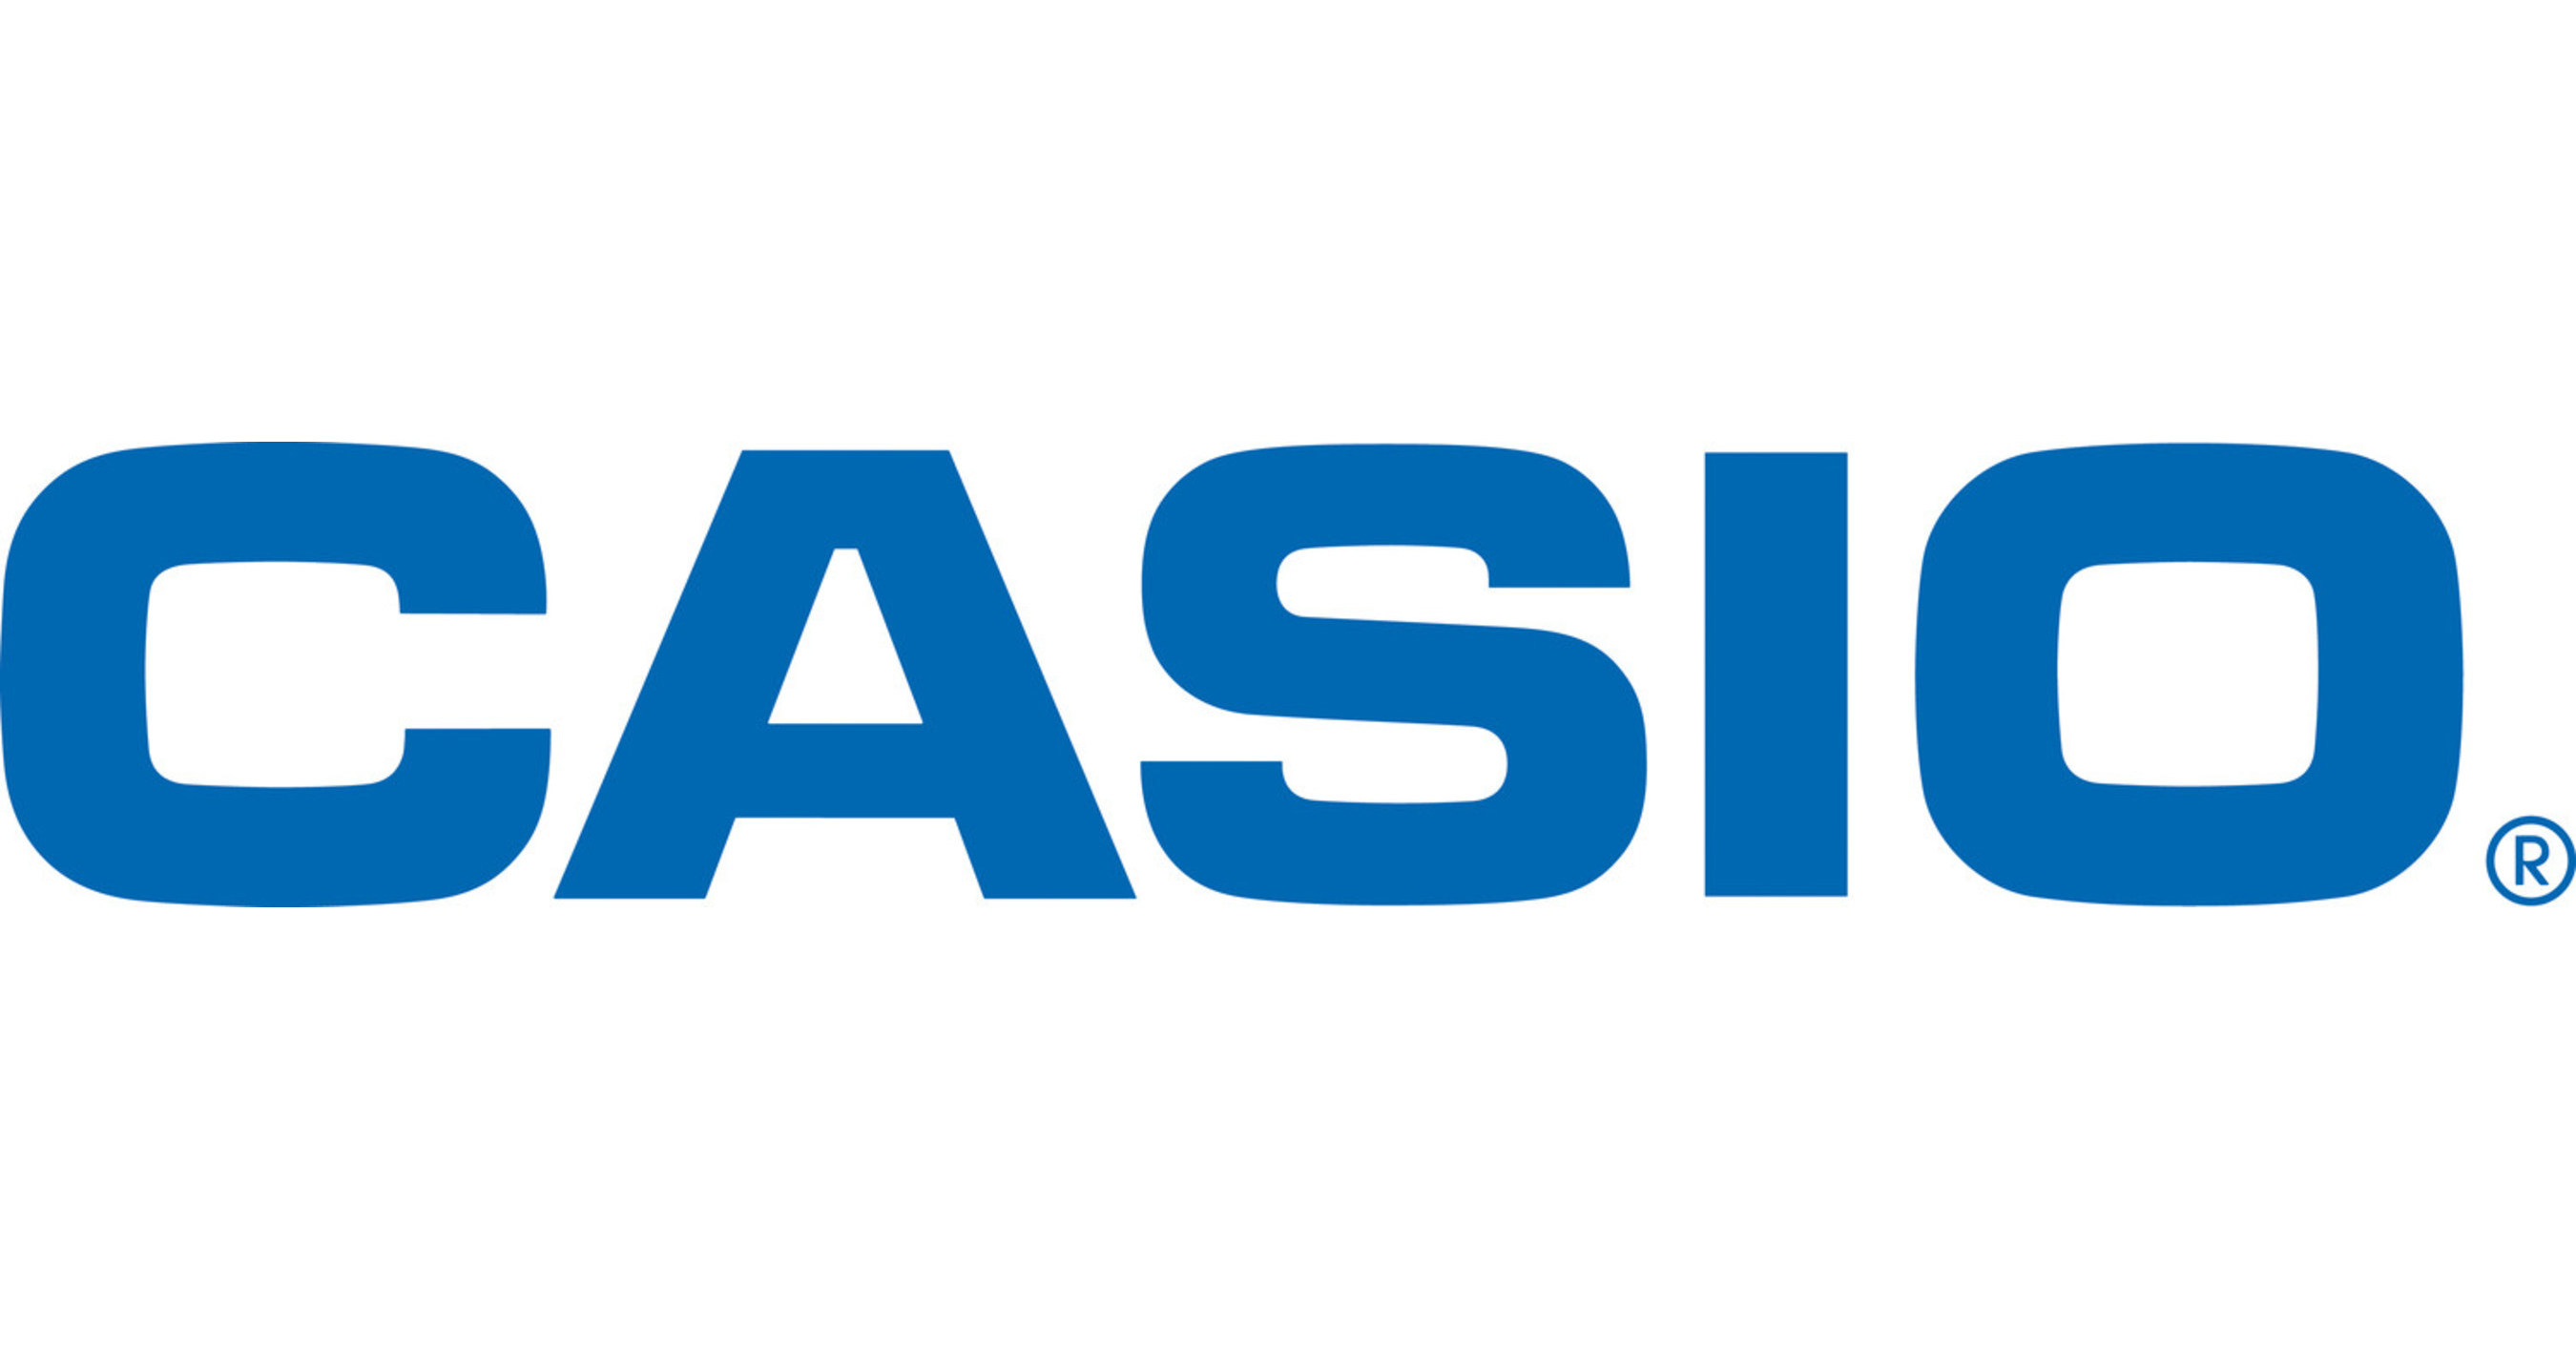 casio encourages everyone to shop local this holiday season